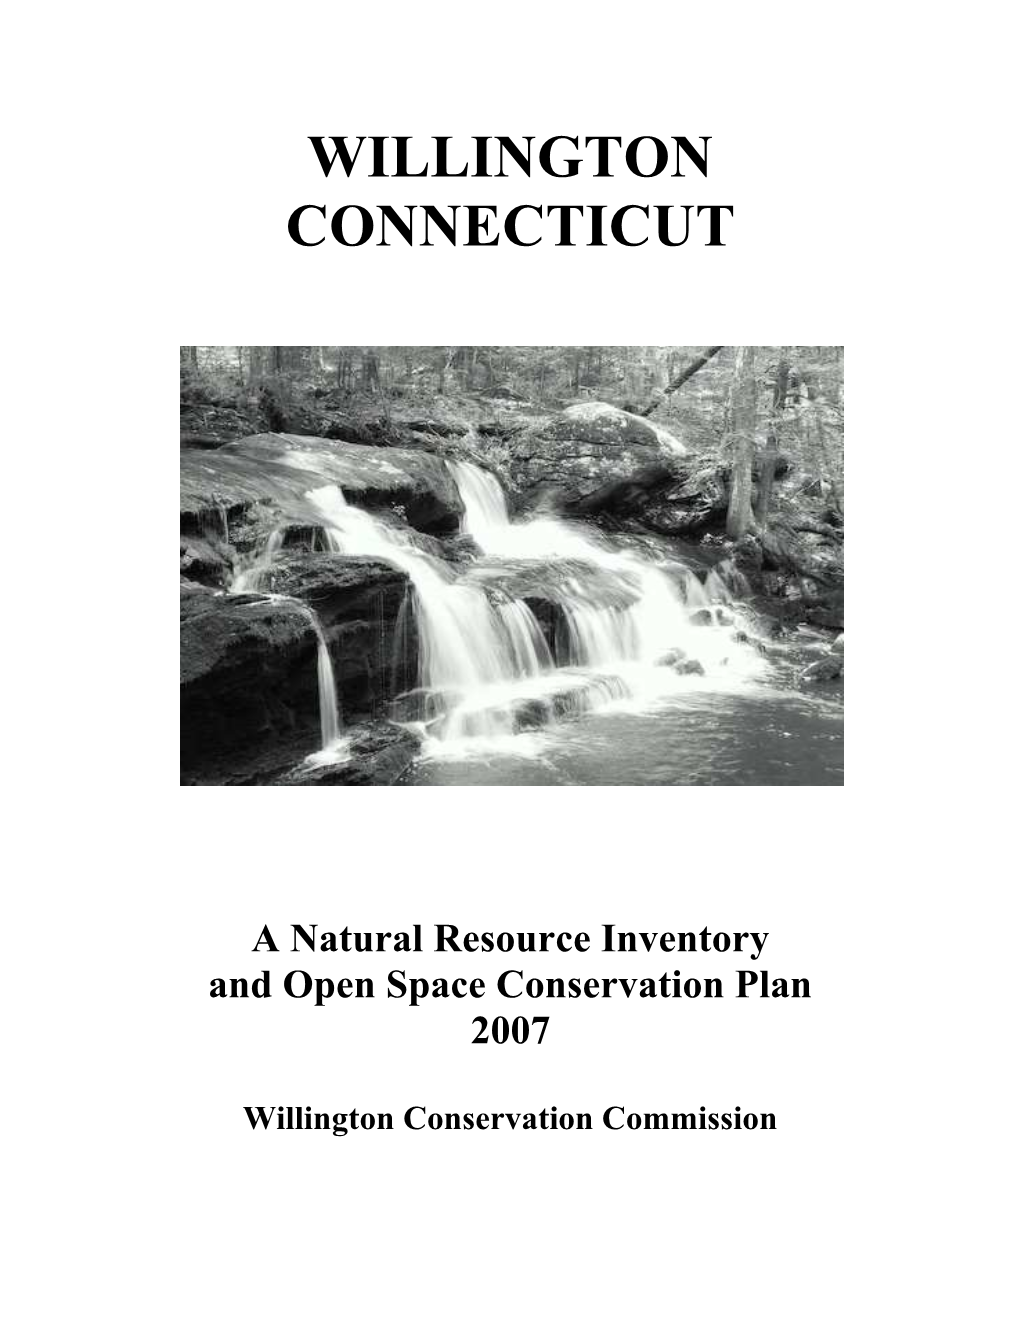 Natural Resource and Open Space Conservation Plan